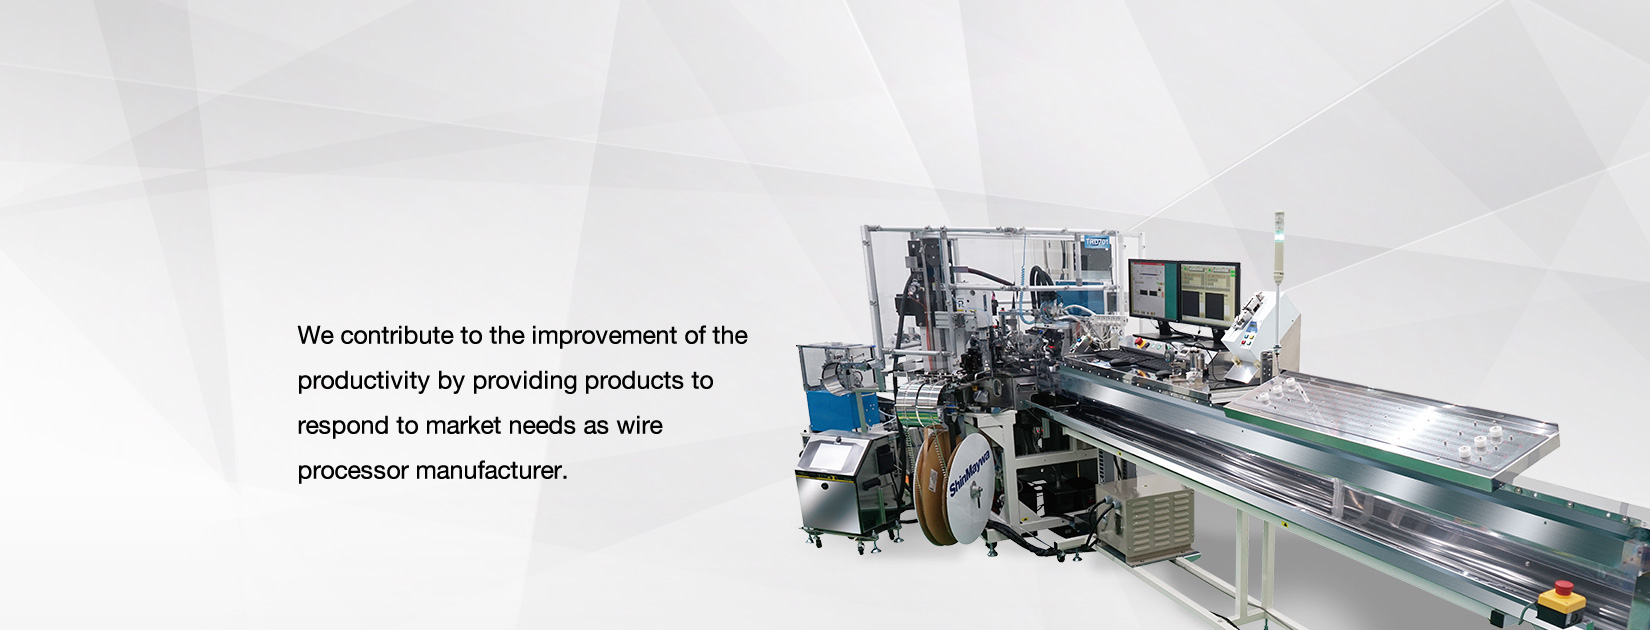 We contribute to the improvement of the productivity by providing products to respond to market needs as wire processor manufacturer.